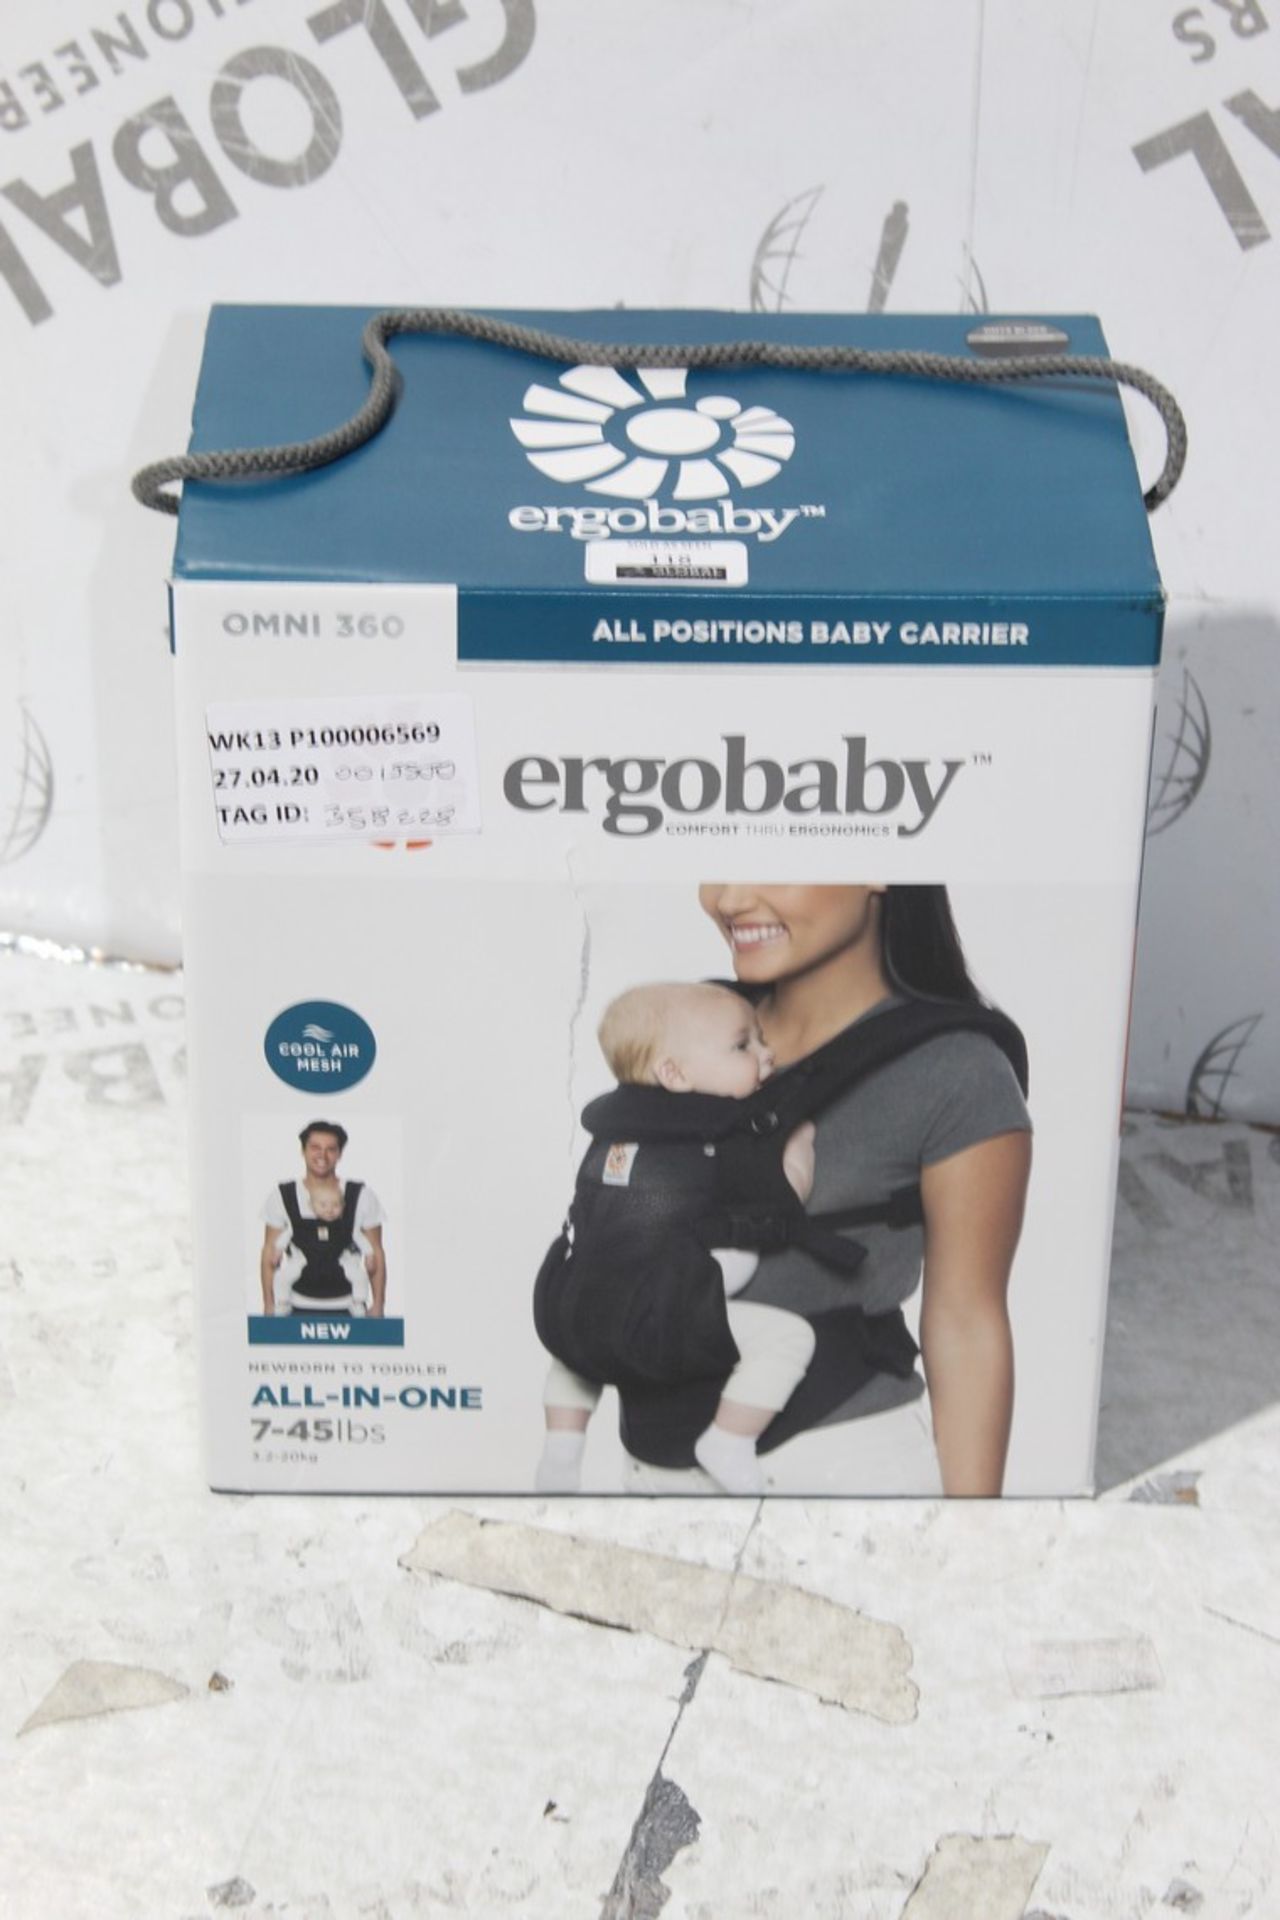 Boxed Urgo Baby 360 All In One Baby Carrier RRP £1